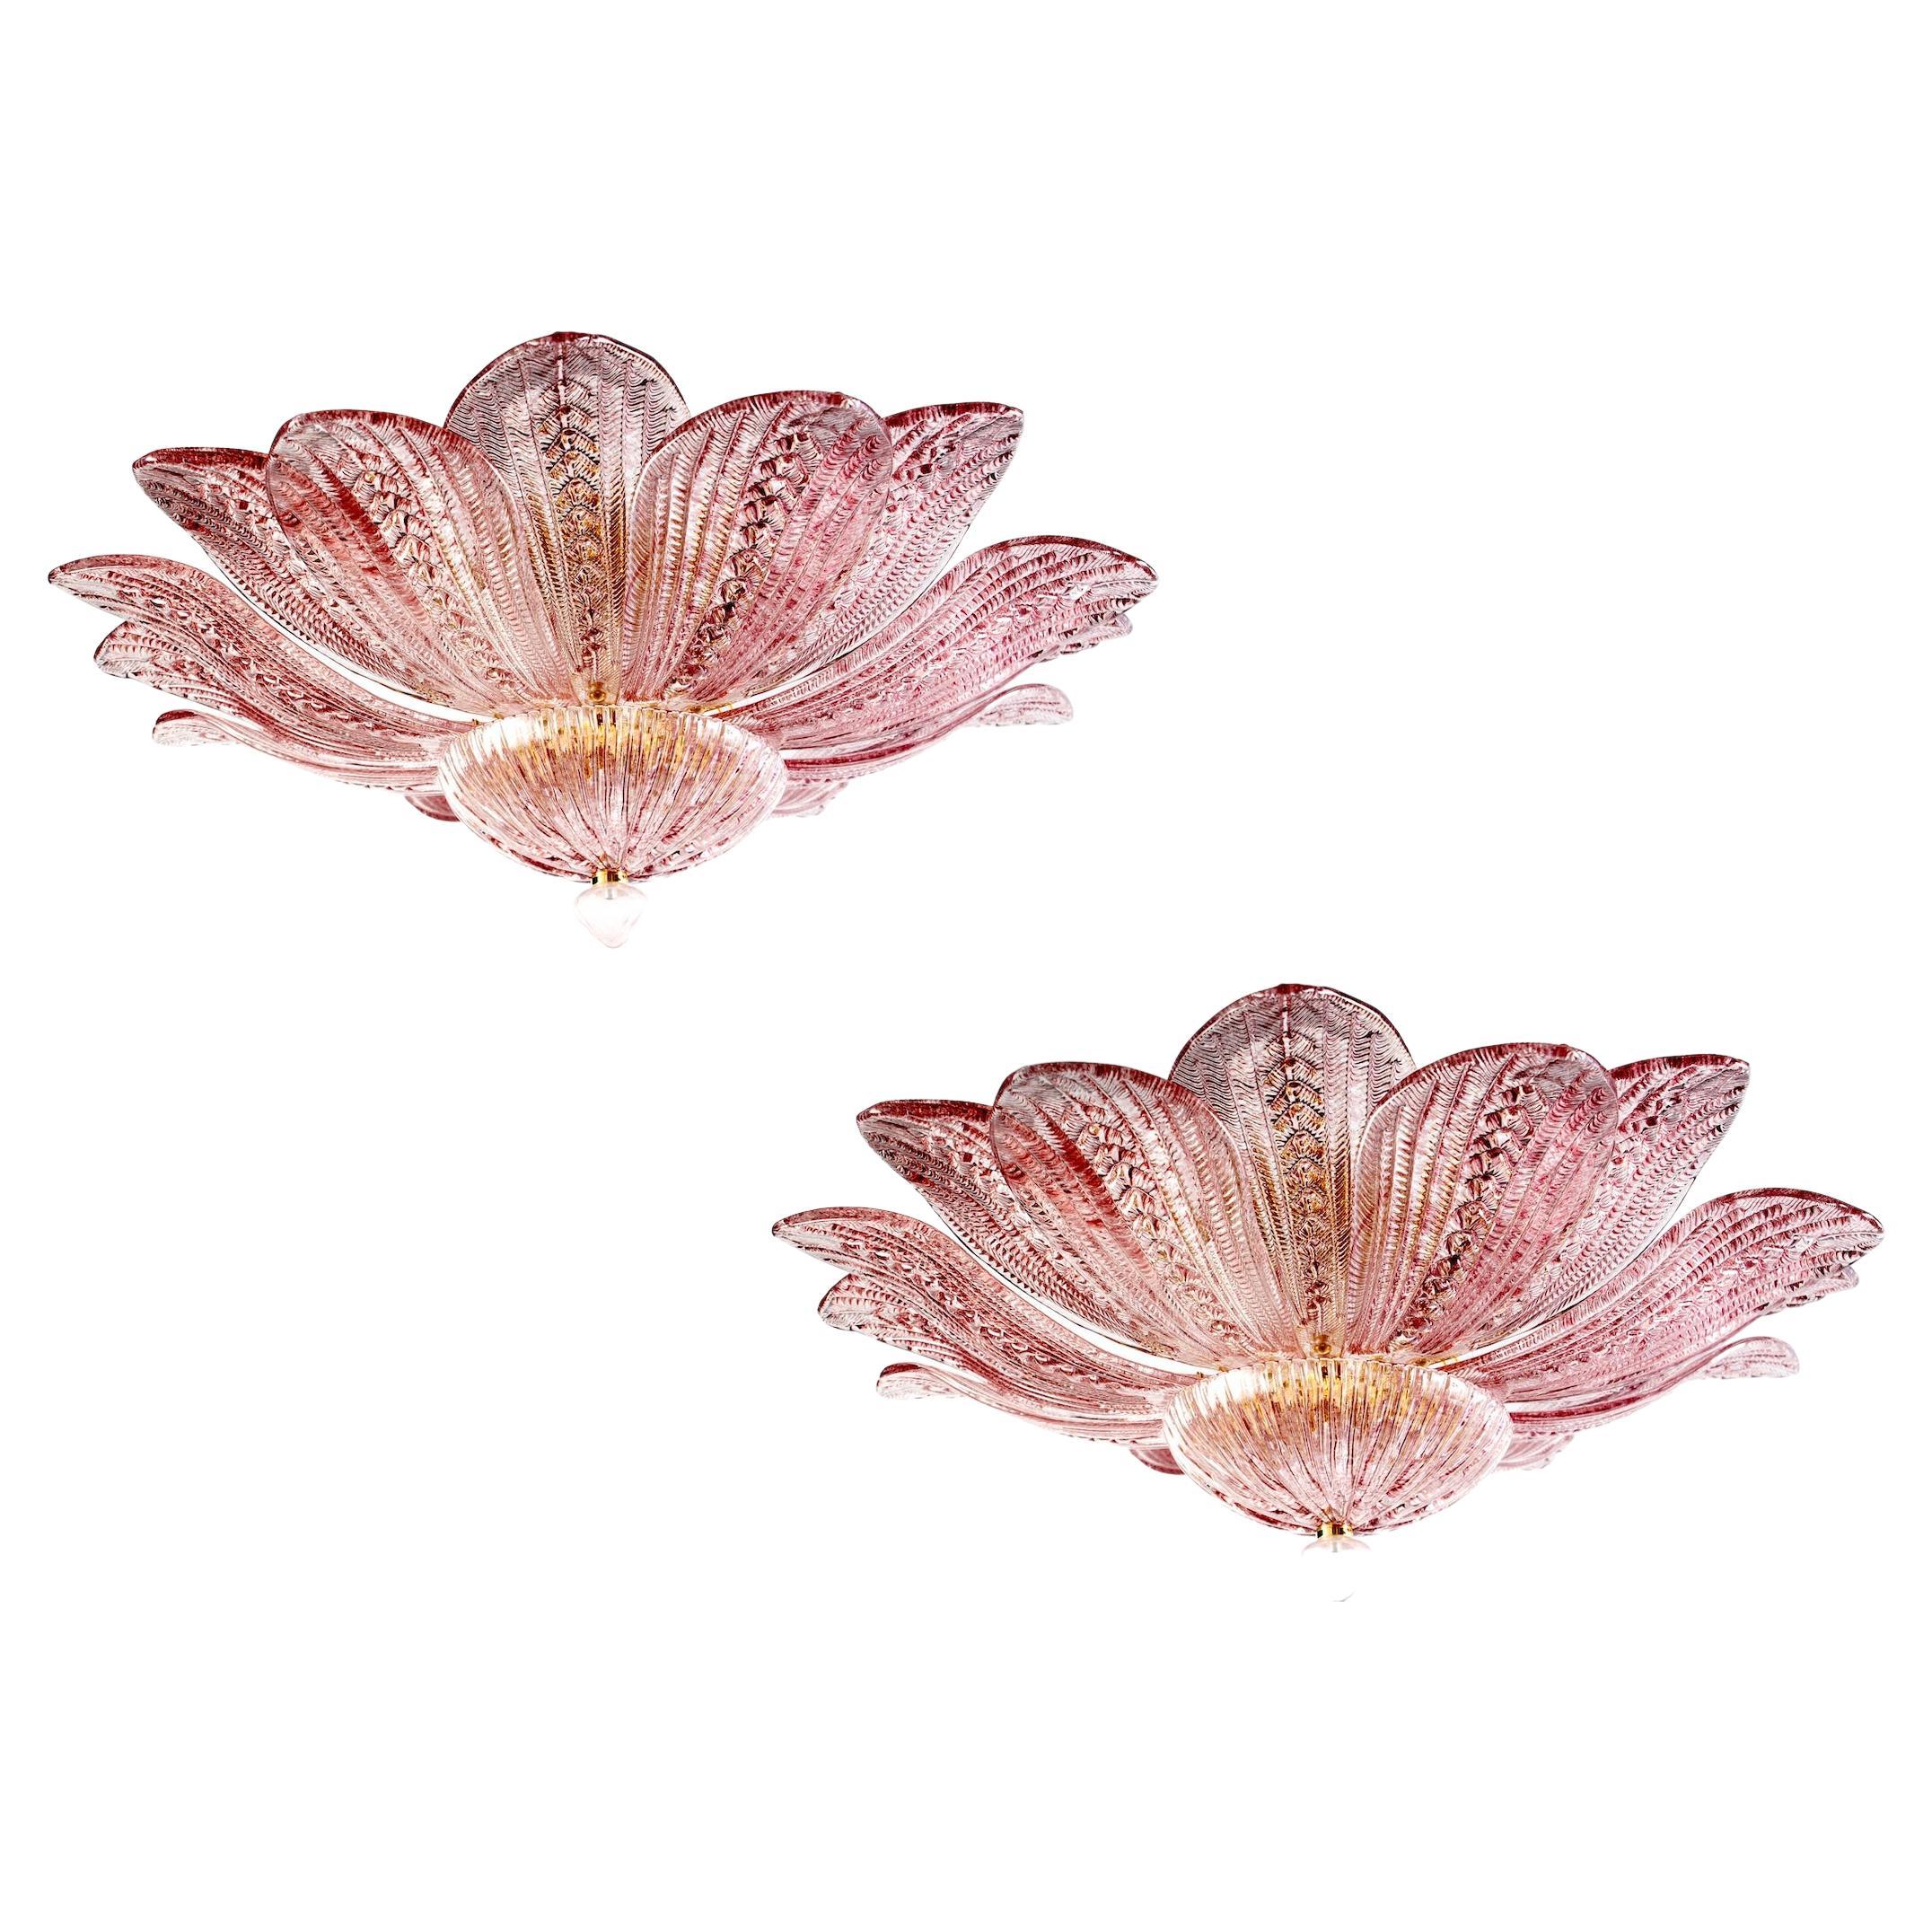 Realized in pure pink amethyst color Murano glass consists of 16 delicious hand-blown leaves.
The structure is gilt-metal.
Five E27 lights spread a magical light.

Available also a largest version diameter cm 100 or cm 160
This light fixture can be